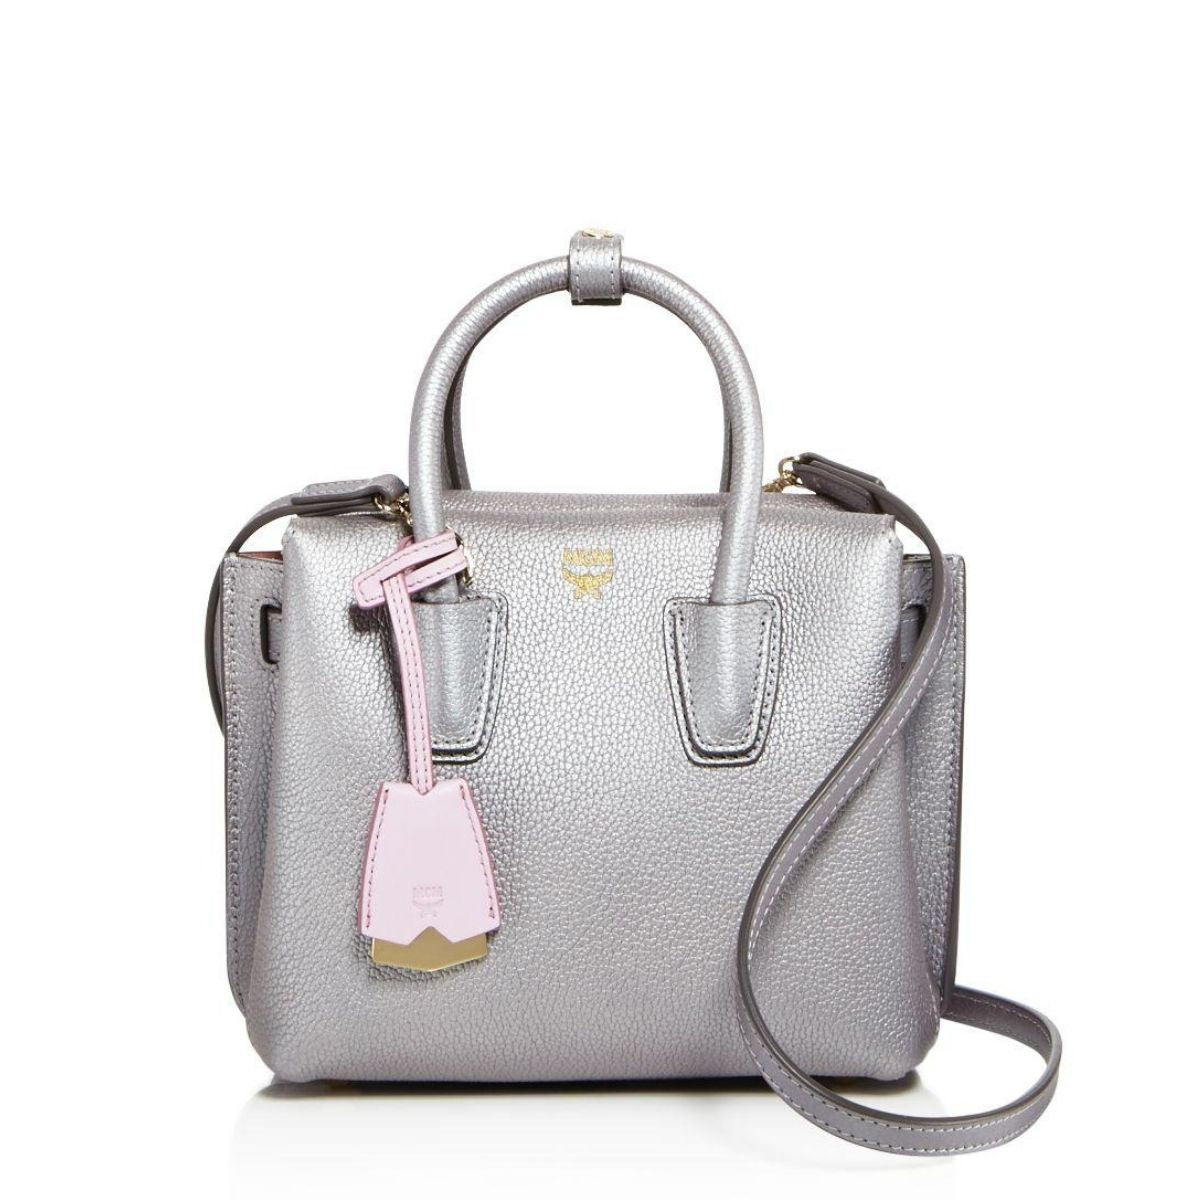 Women's Mini Star Bag in silver laminated leather with tone-on